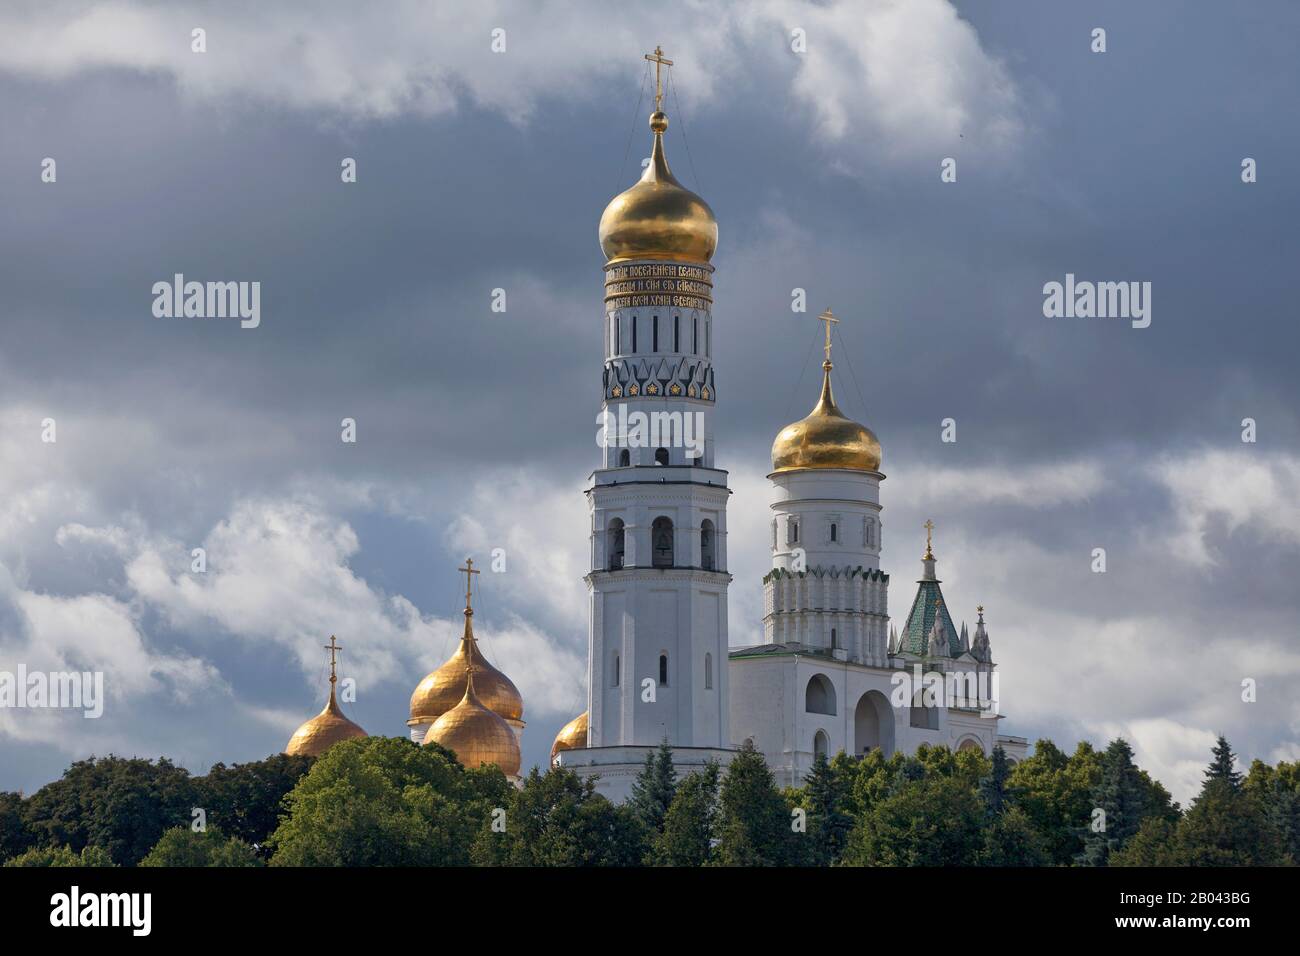 Moscow, Russia - July 07 2018: The Ivan the Great Bell-Tower and the onion domes of the Dormition Cathedral. Stock Photo